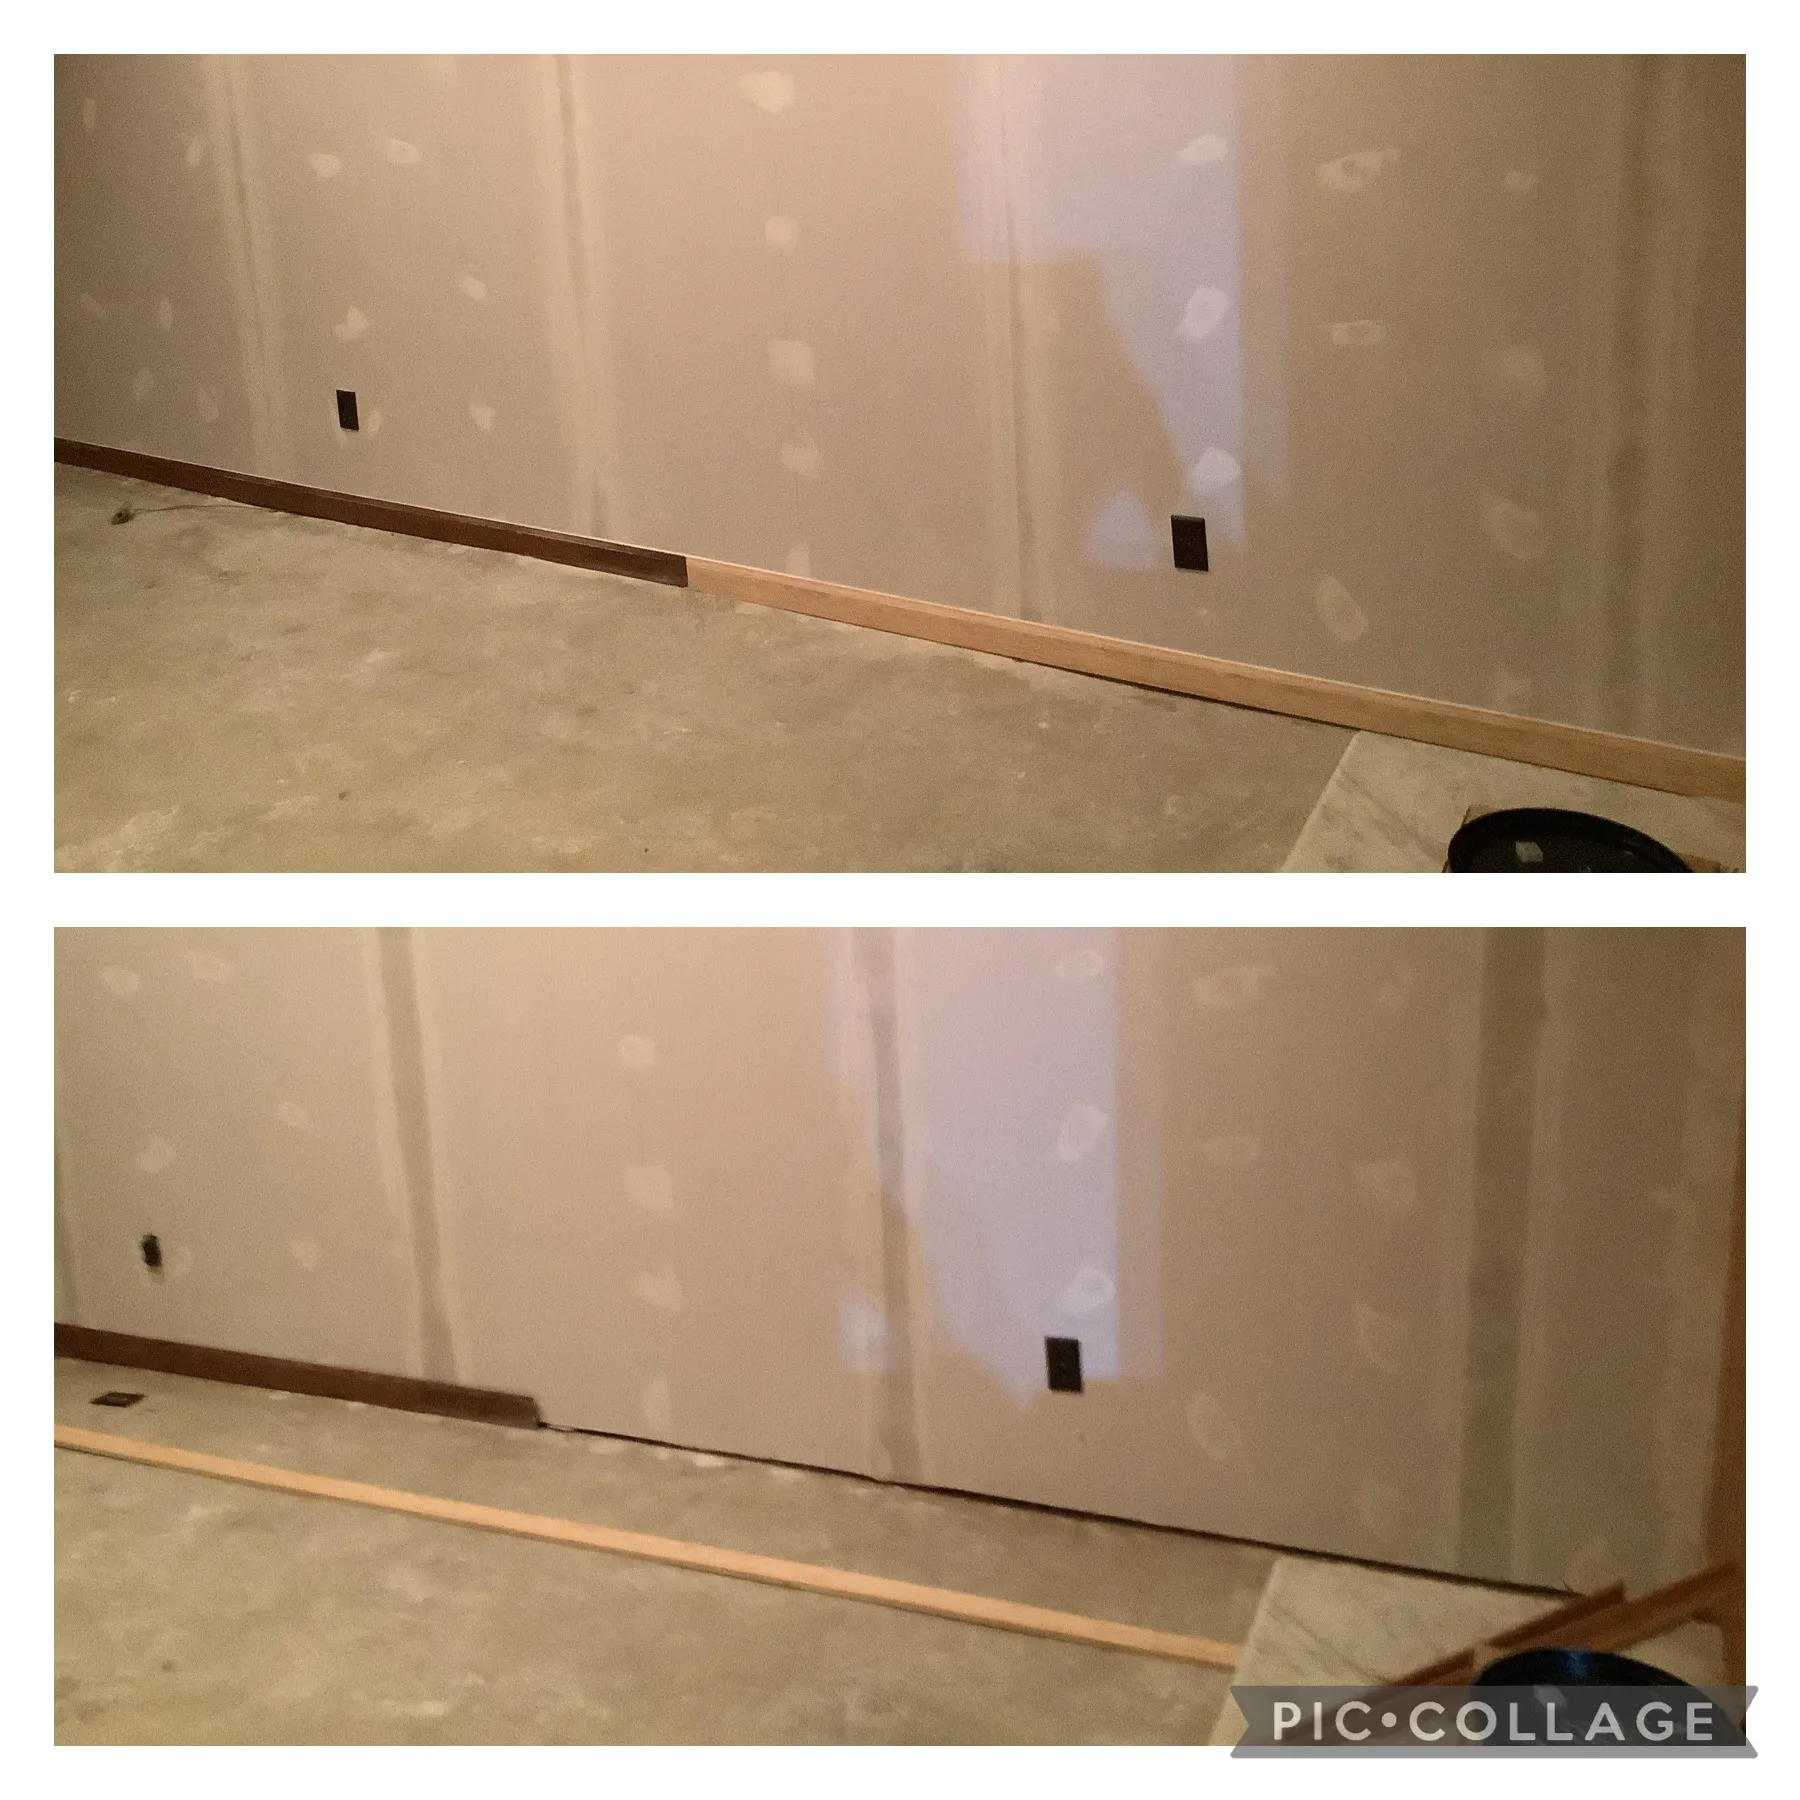 Baseboard before and after replacement by Mr. Handyman of Wheaton-Hinsdale.